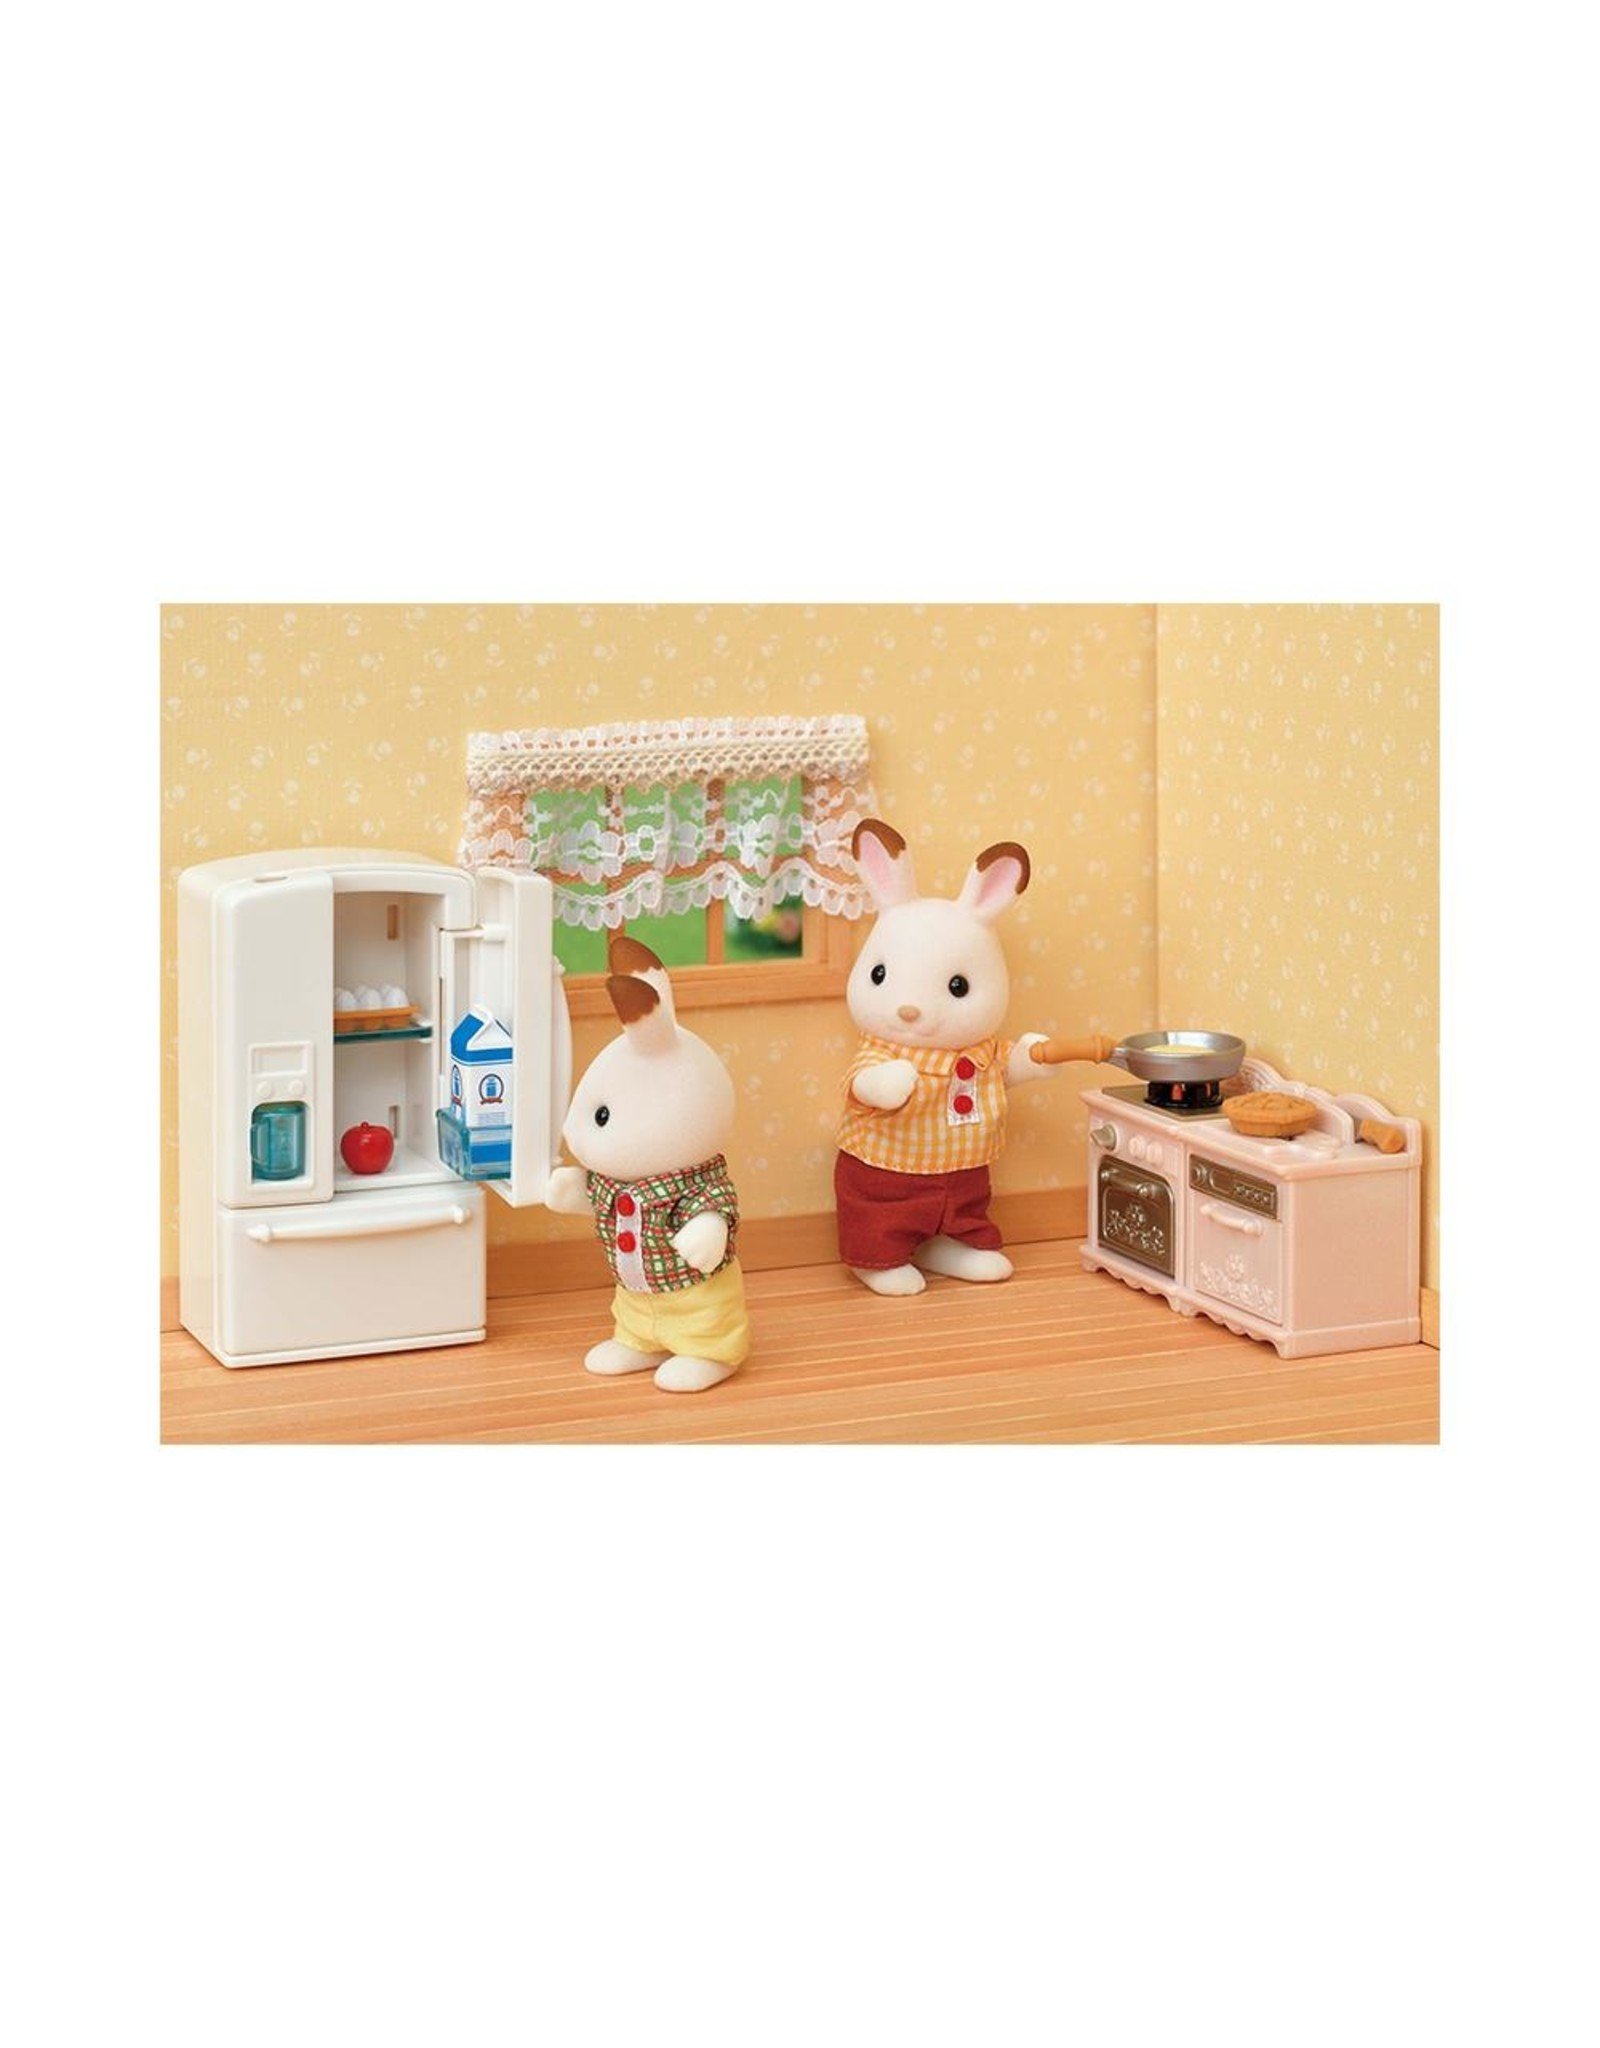 Calico Critters Calico Critters Playful Starter Furniture Set